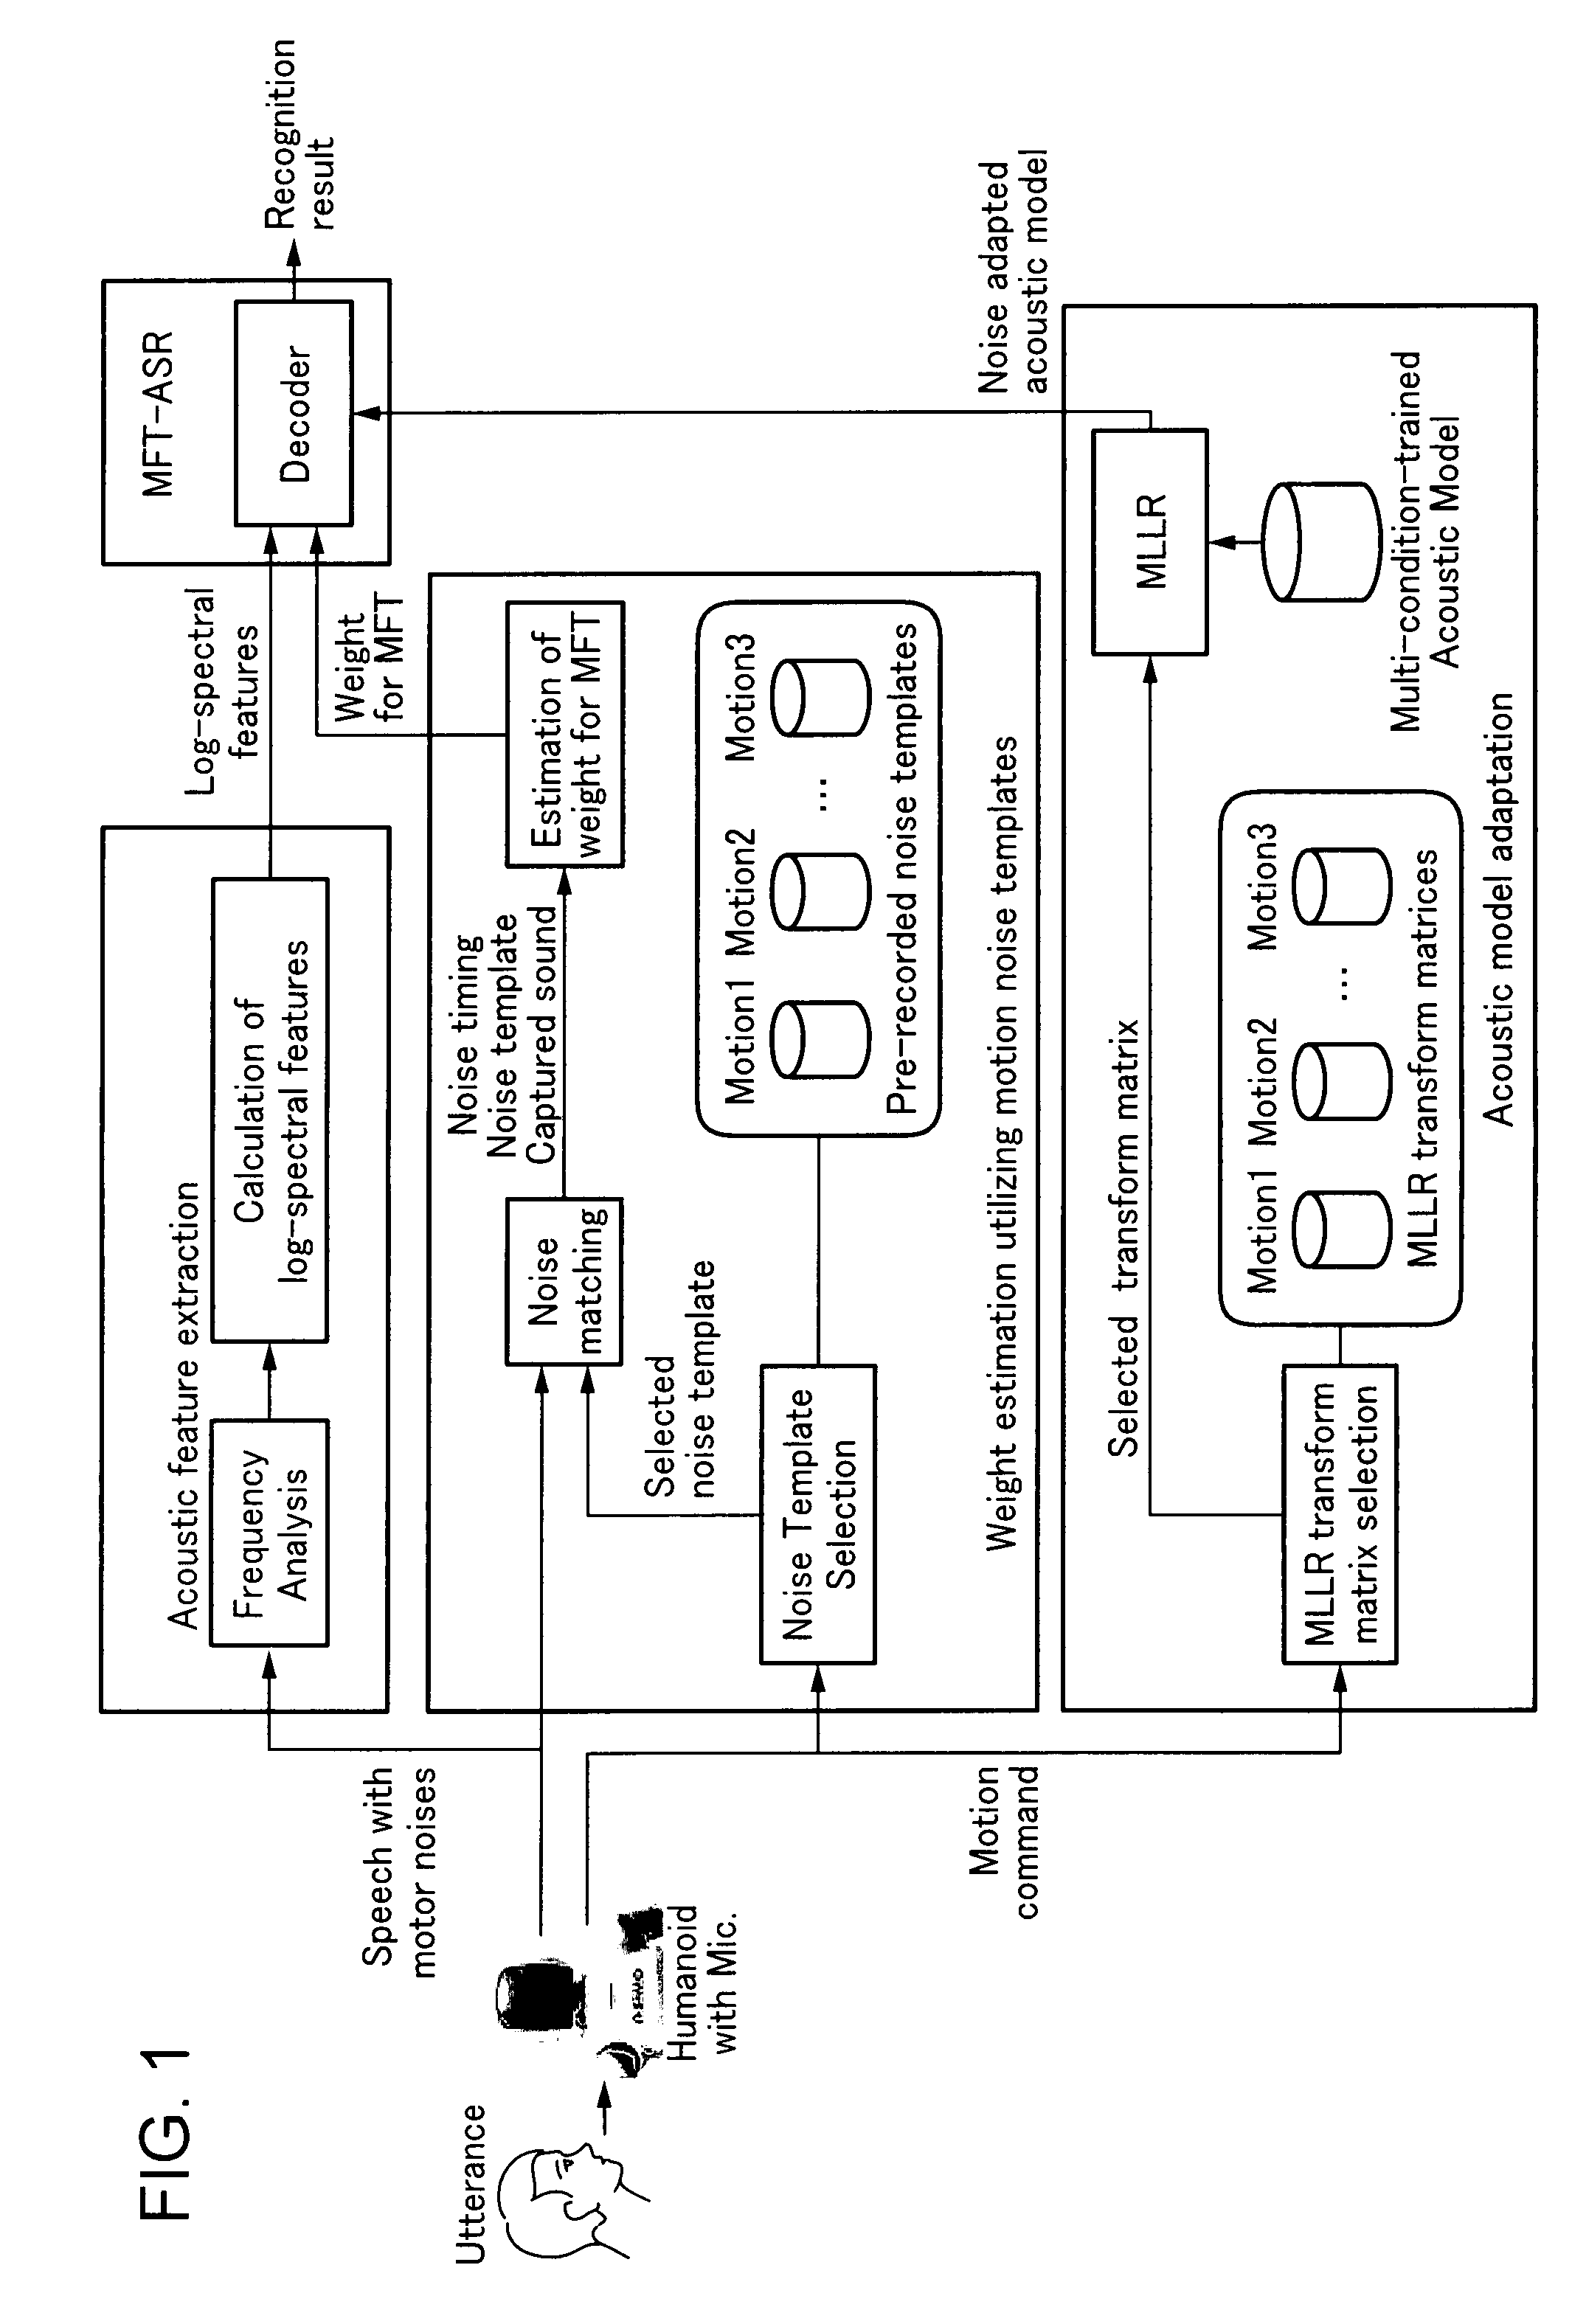 Speech recognition method for robot under motor noise thereof